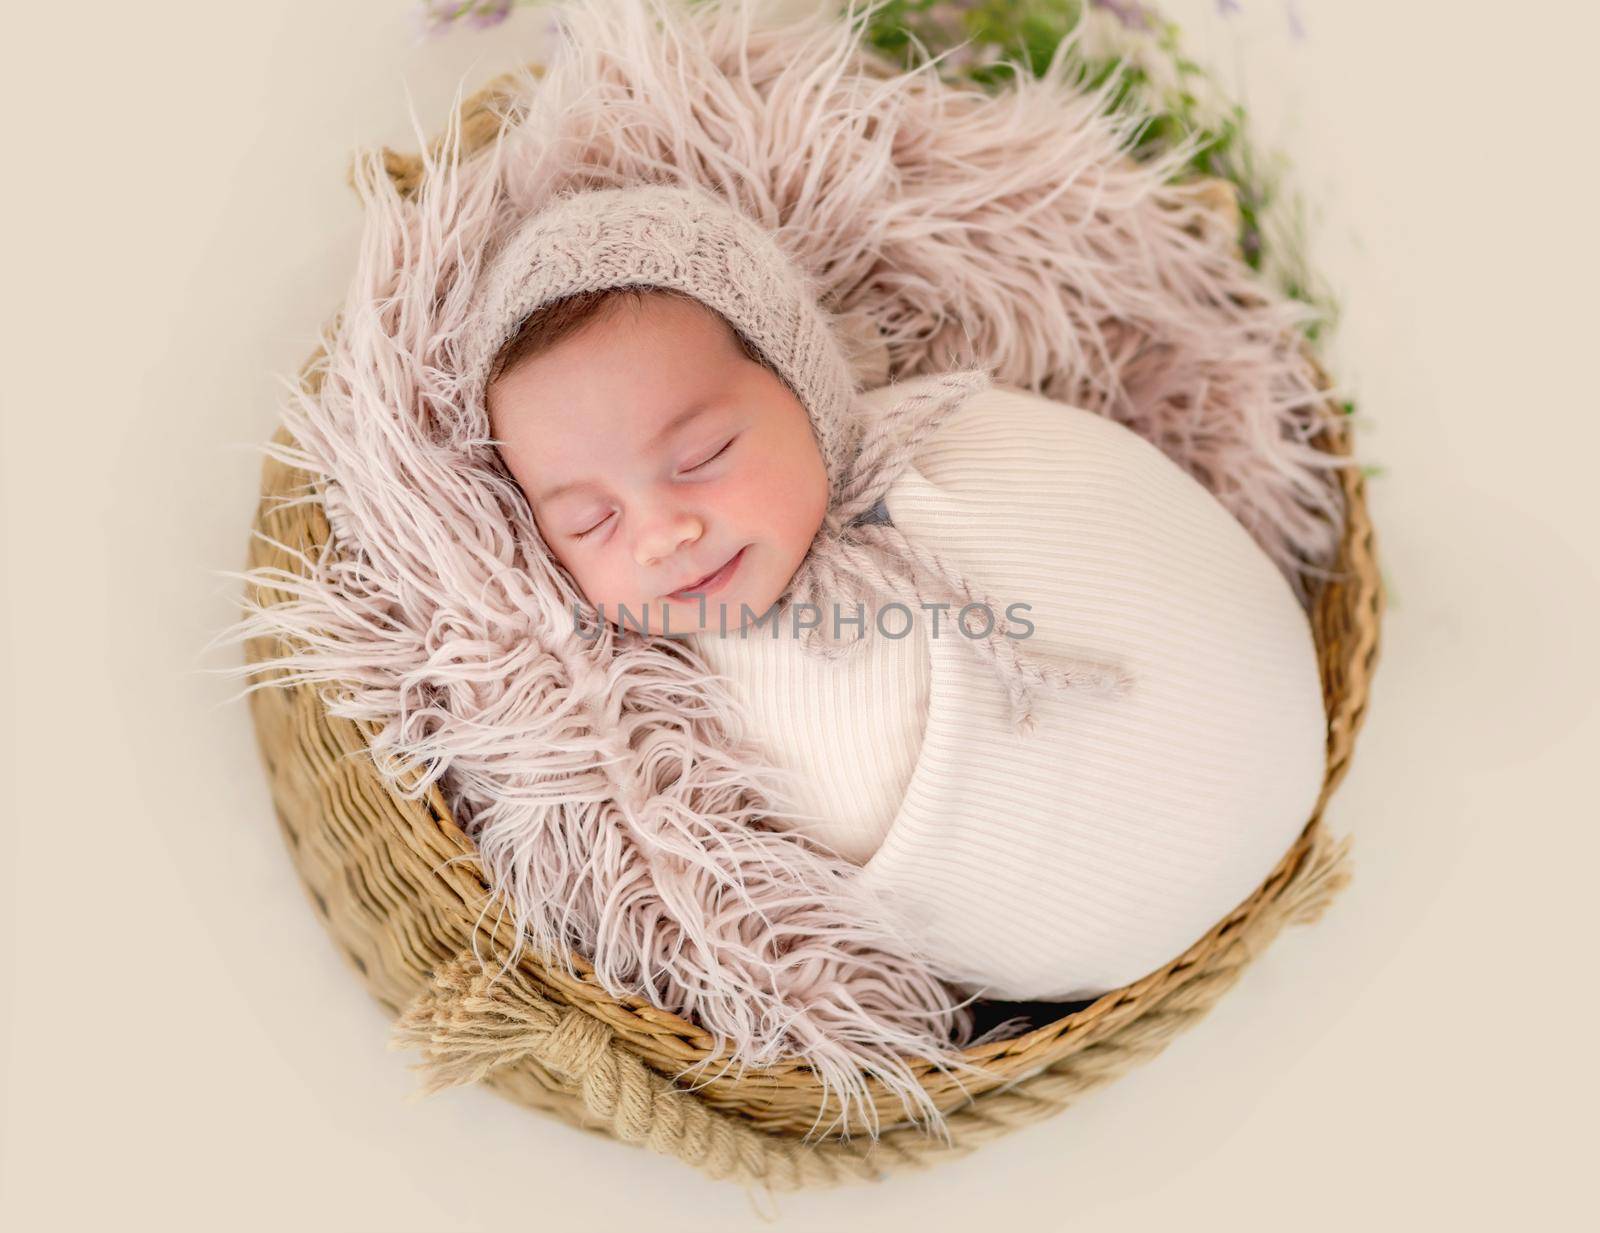 Portrait of beautiful newborn baby girl swaadled in fabric and wearing knitted hat sleeping in basket with fur during studio photoshoot. Cute infant child napping